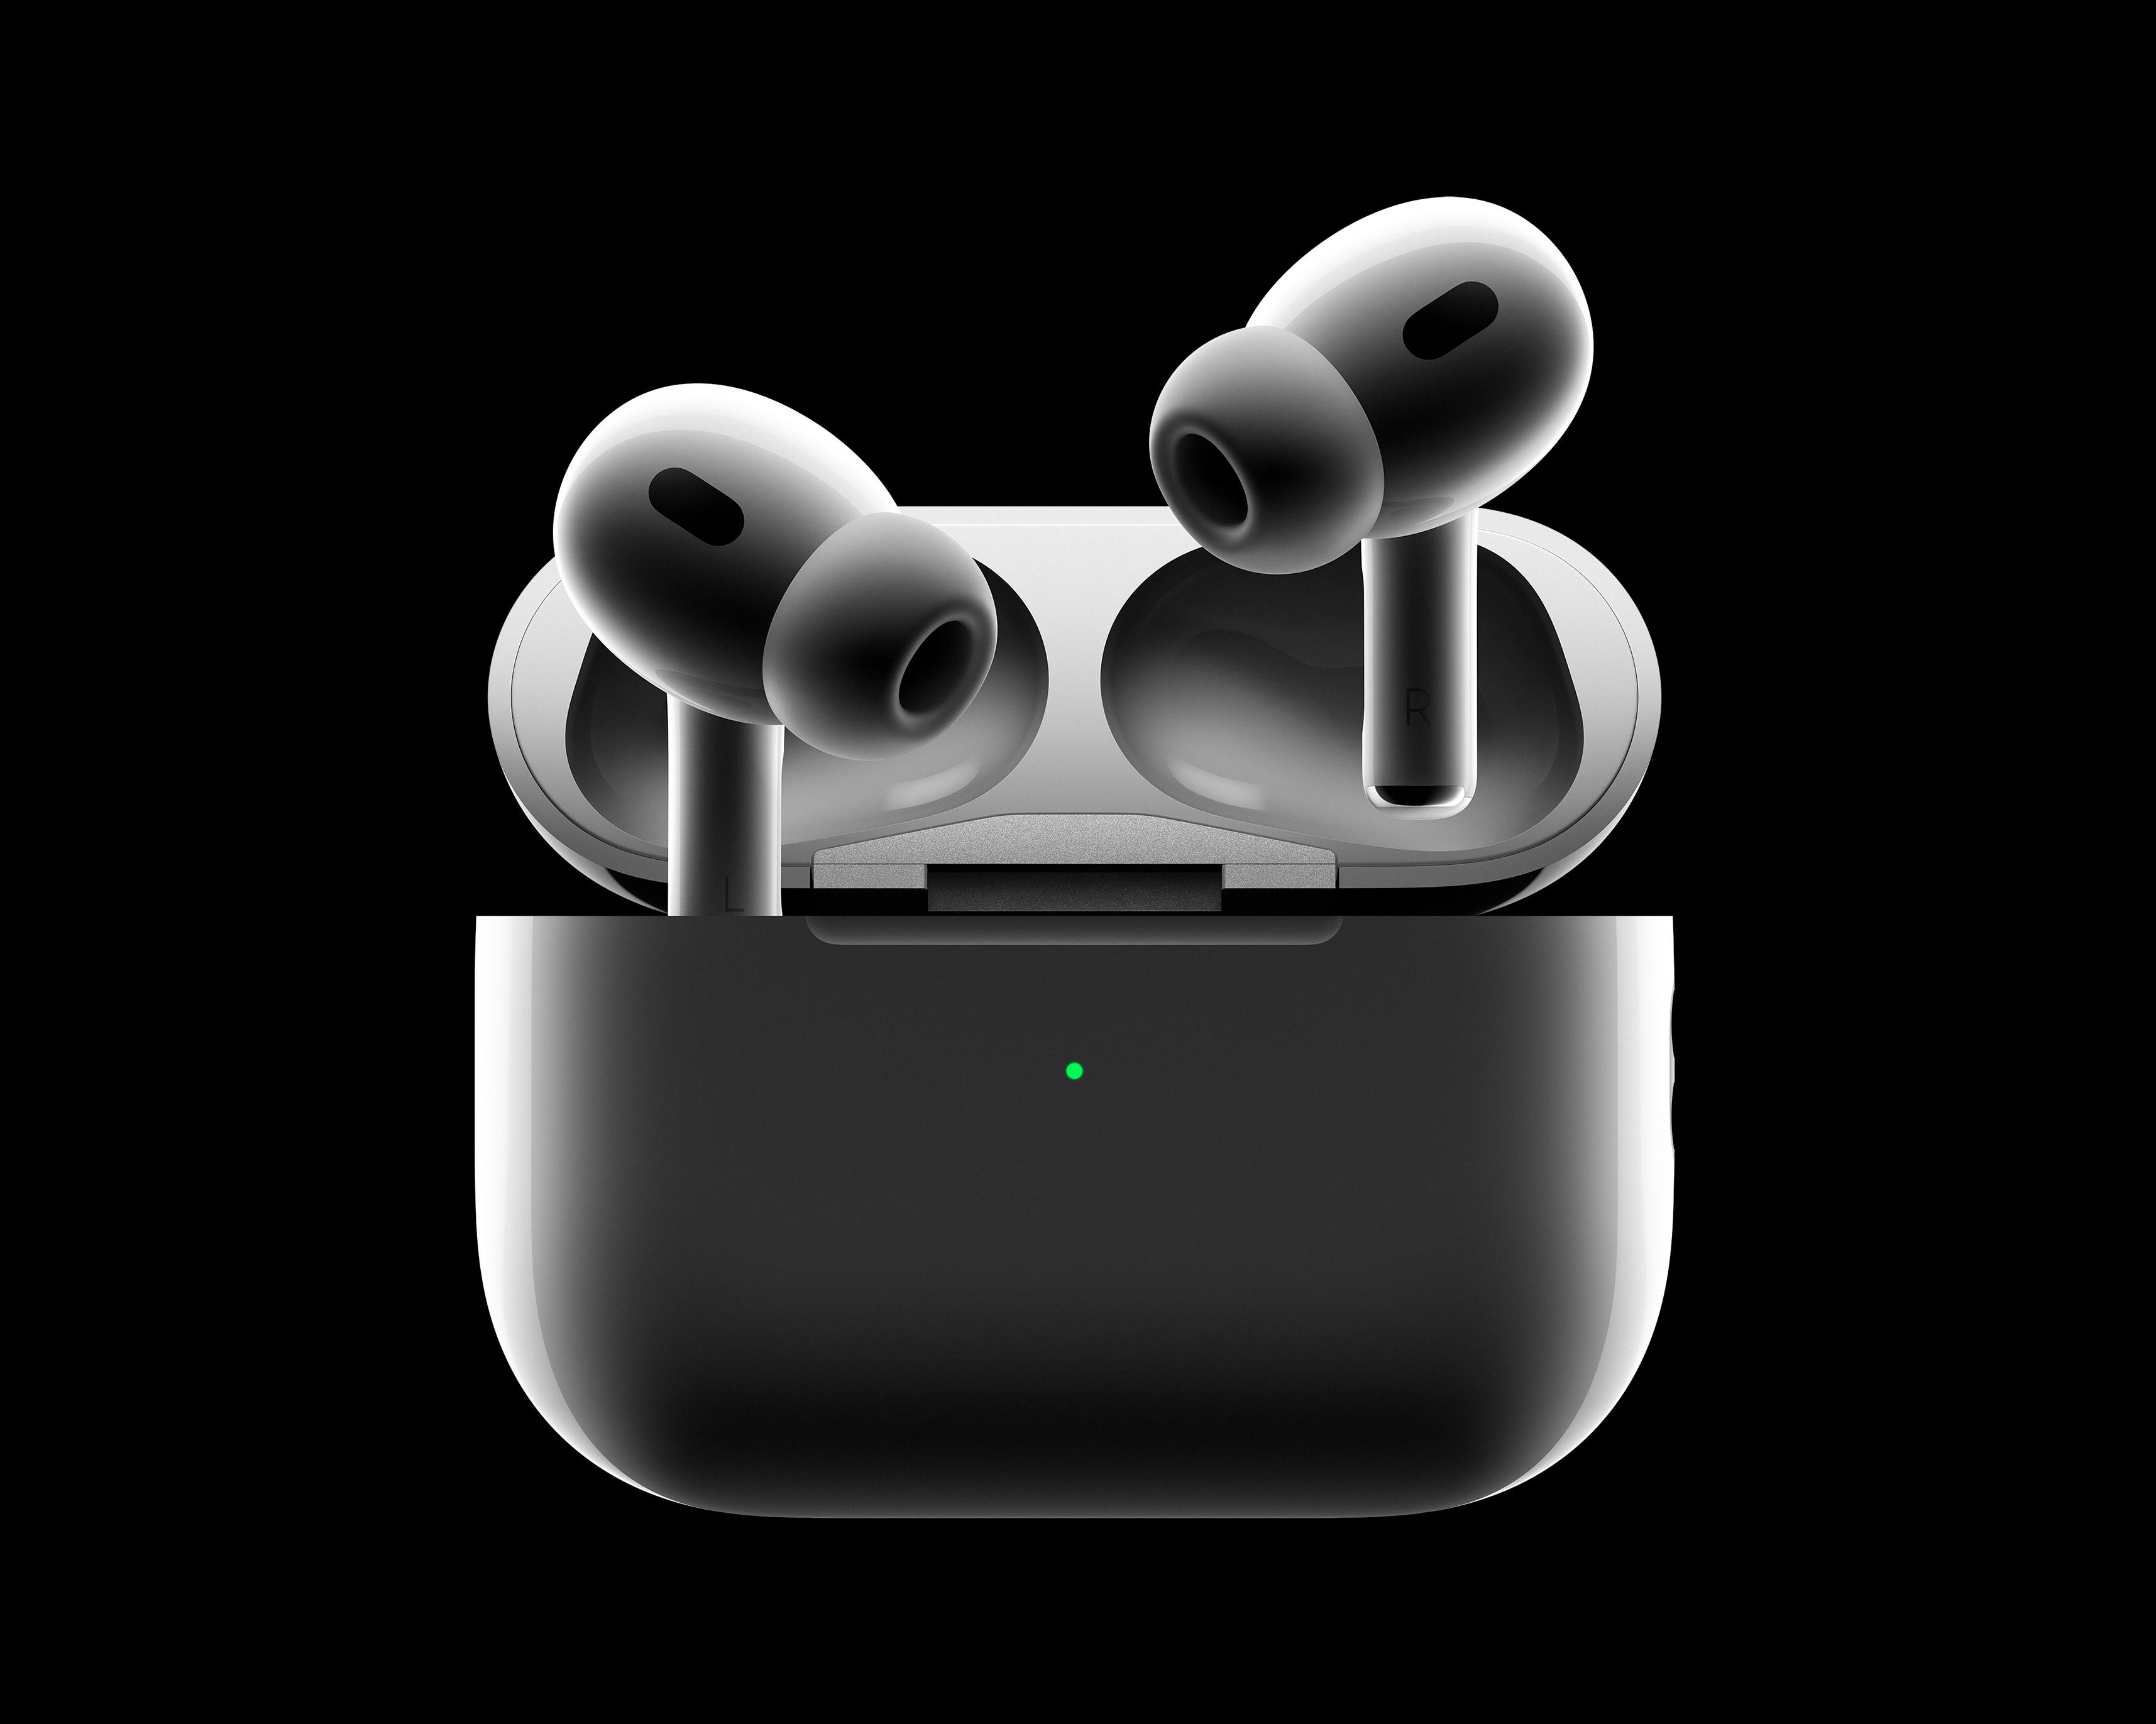 How to Troubleshoot When Your T12 Airpods Are Not Working? 7